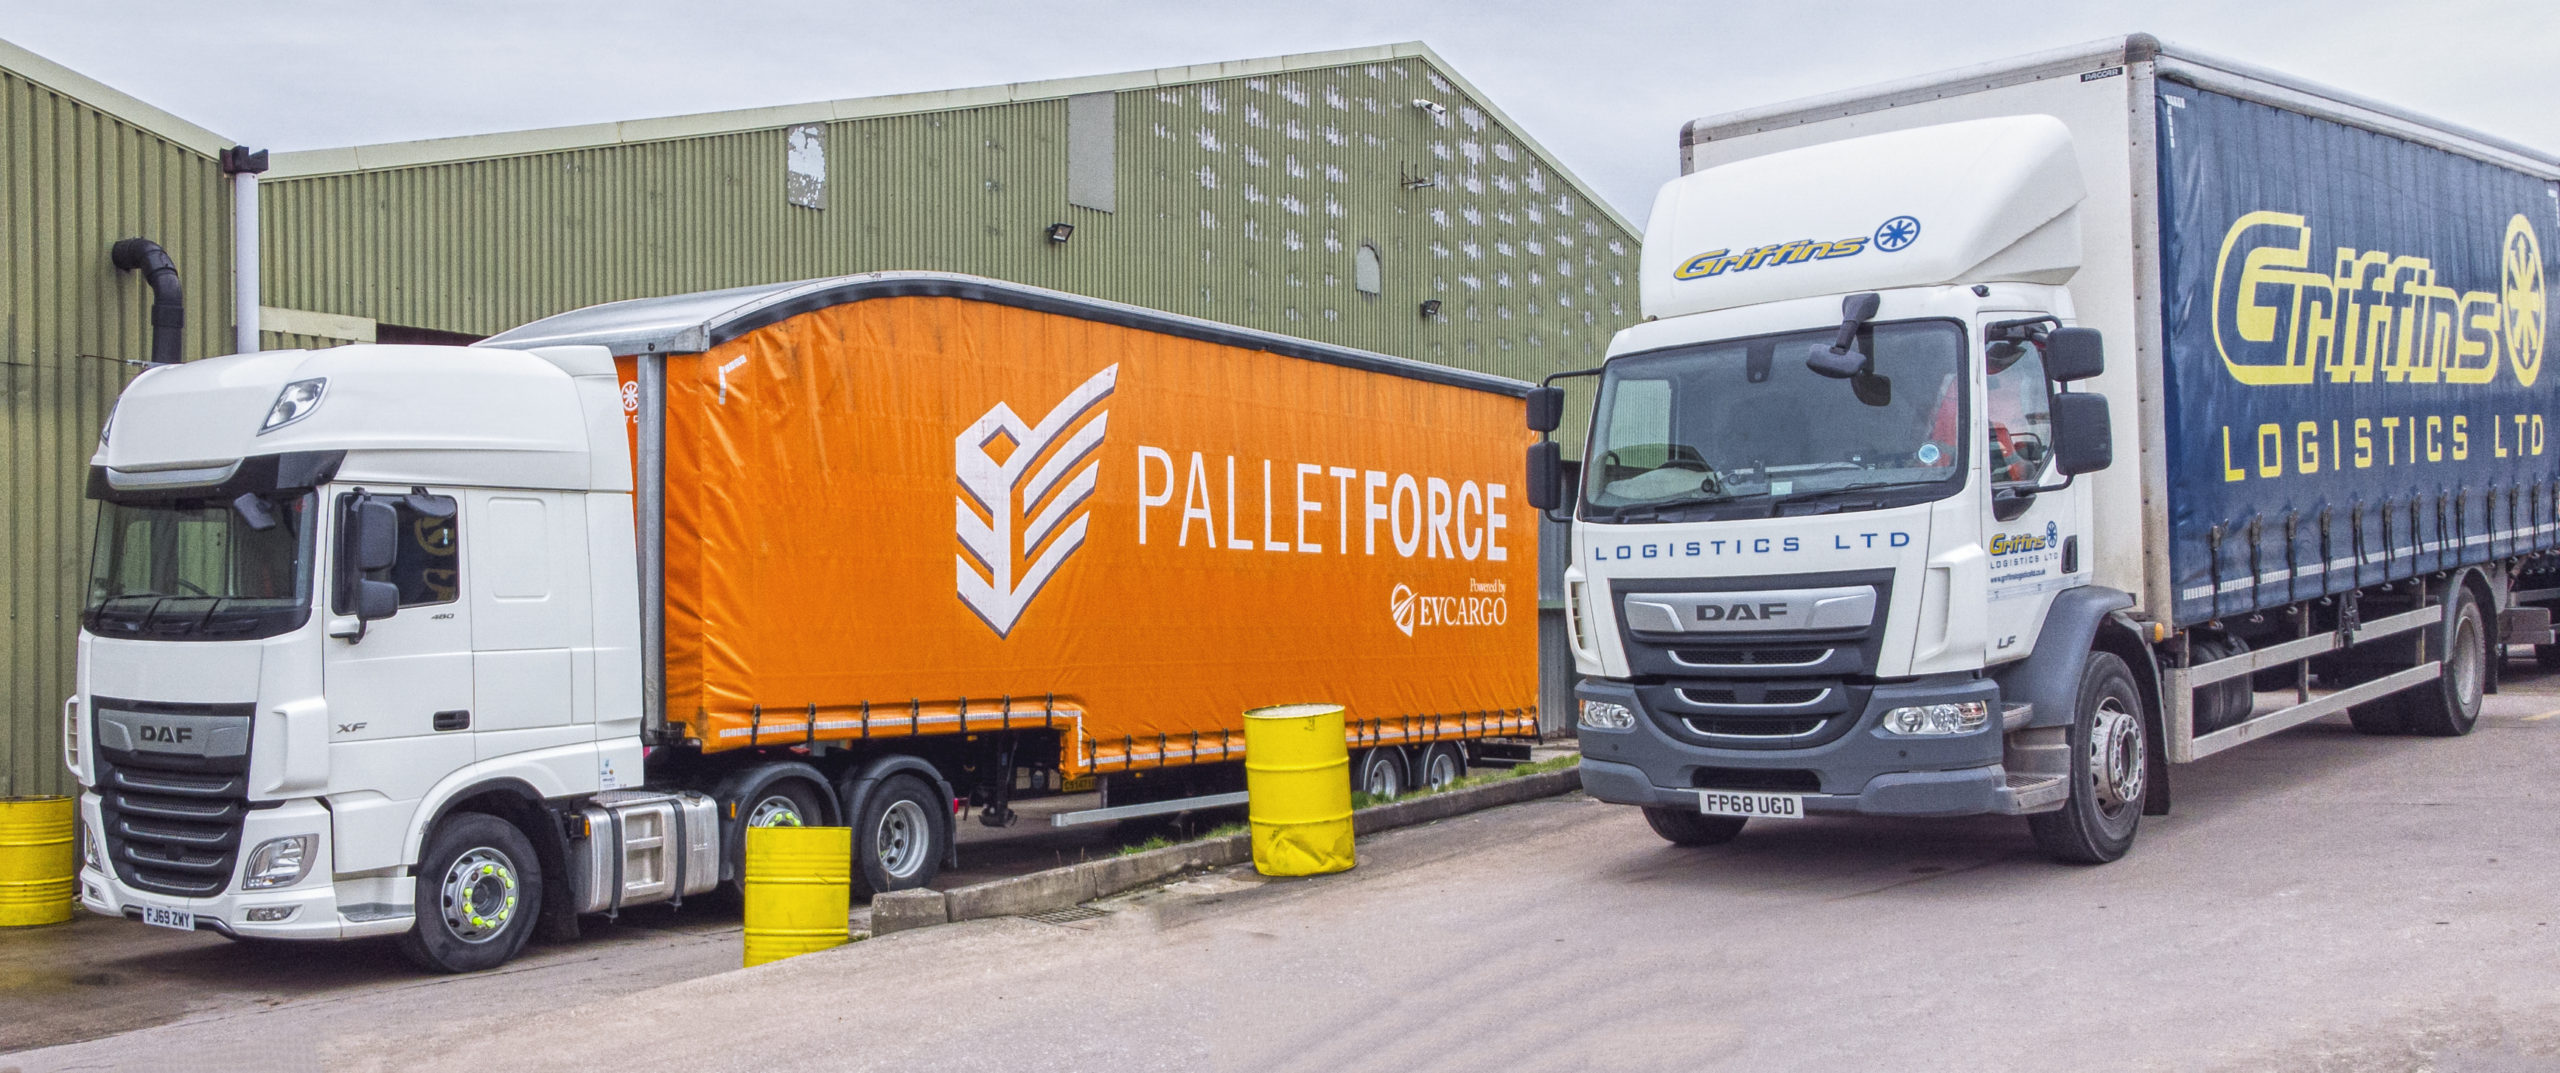 Palletforce and griffins lorry parked up